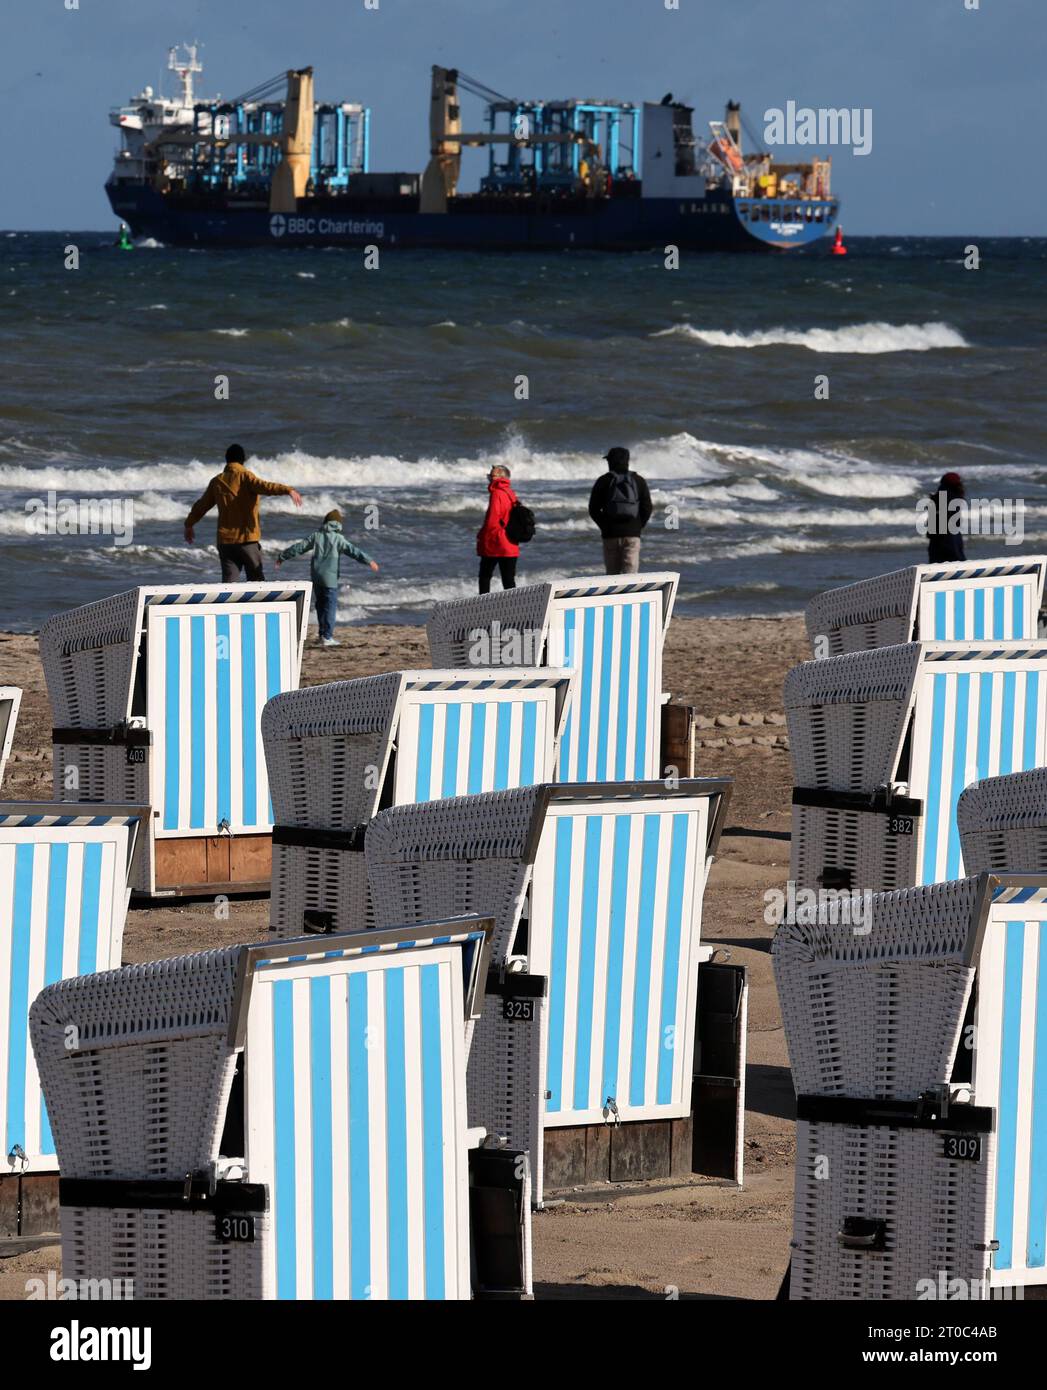 PRODUCTION - 05 October 2023, Mecklenburg-Western Pomerania, Warnemünde: There are still many beach chairs available for guests on the Baltic Sea beach. This will especially please vacationers during the beginning autumn vacations. The beach chairs may remain standing until 15.10.2023, after which they must make way for coastal protection for the upcoming autumn storms, according to Schwerin's Ministry of the Environment. Photo: Bernd Wüstneck/dpa Stock Photo